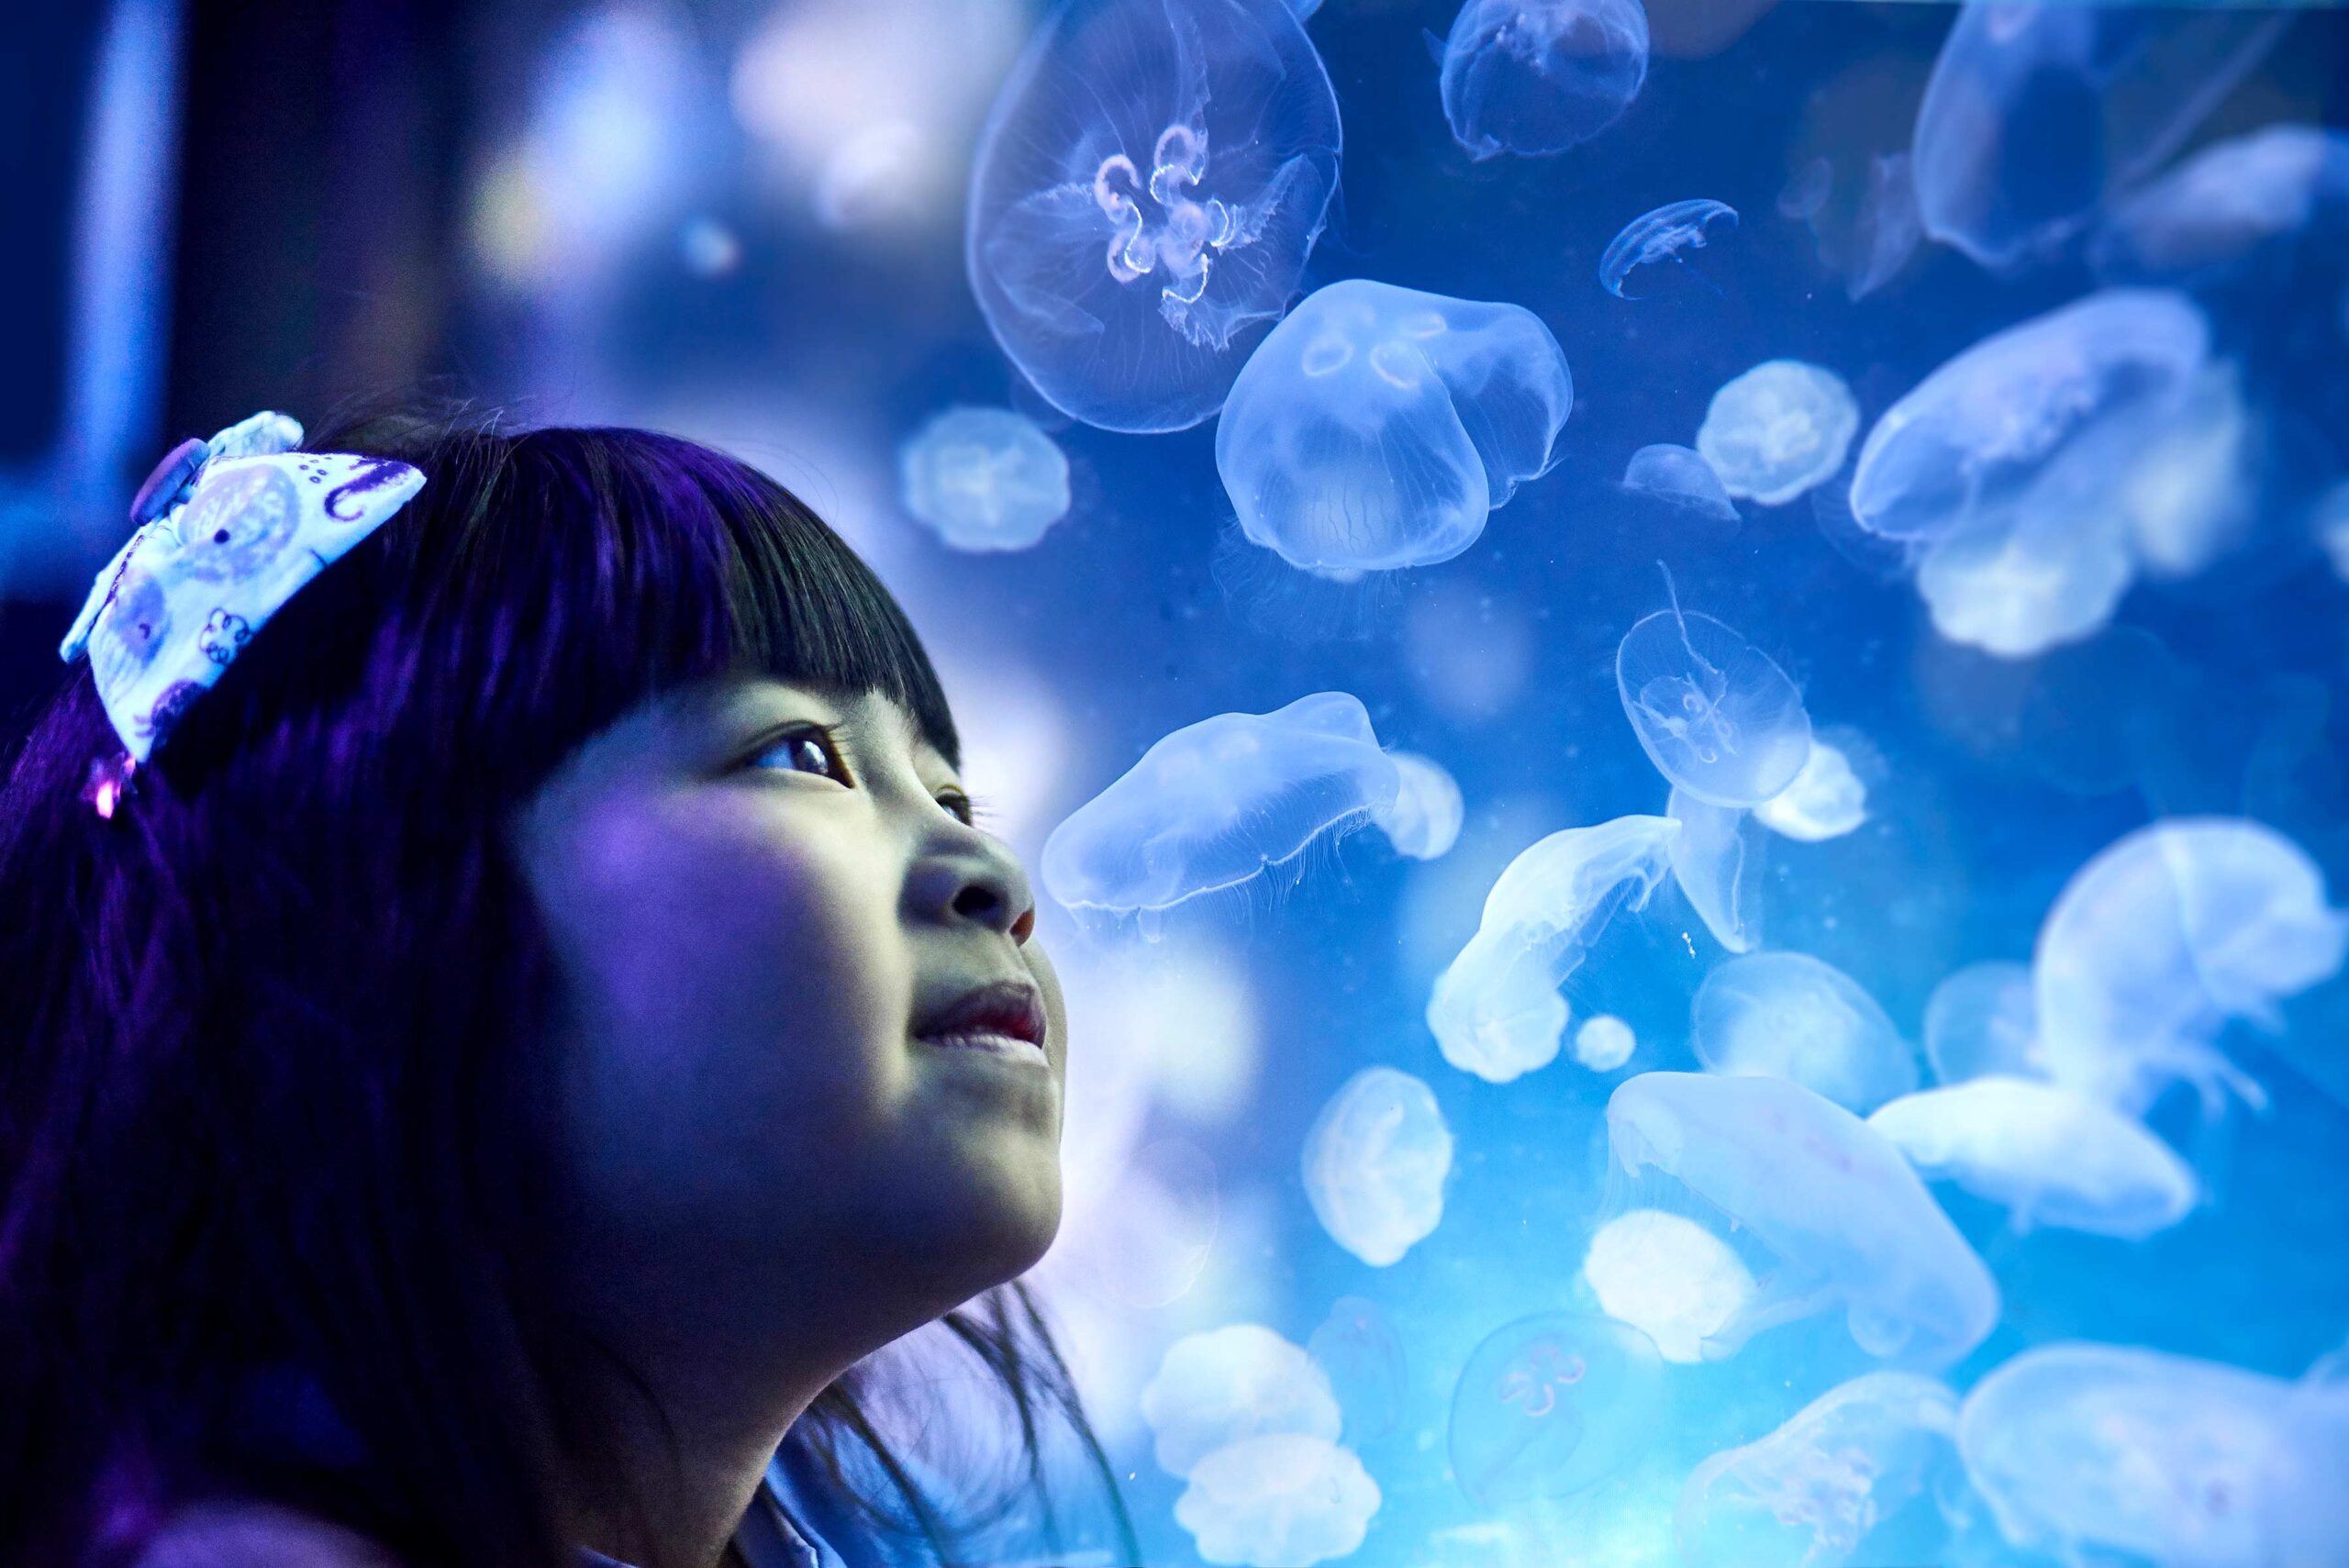 A young Melbourne girl watches jellyfish through a water tank at Sea Life aquarium Melbourne